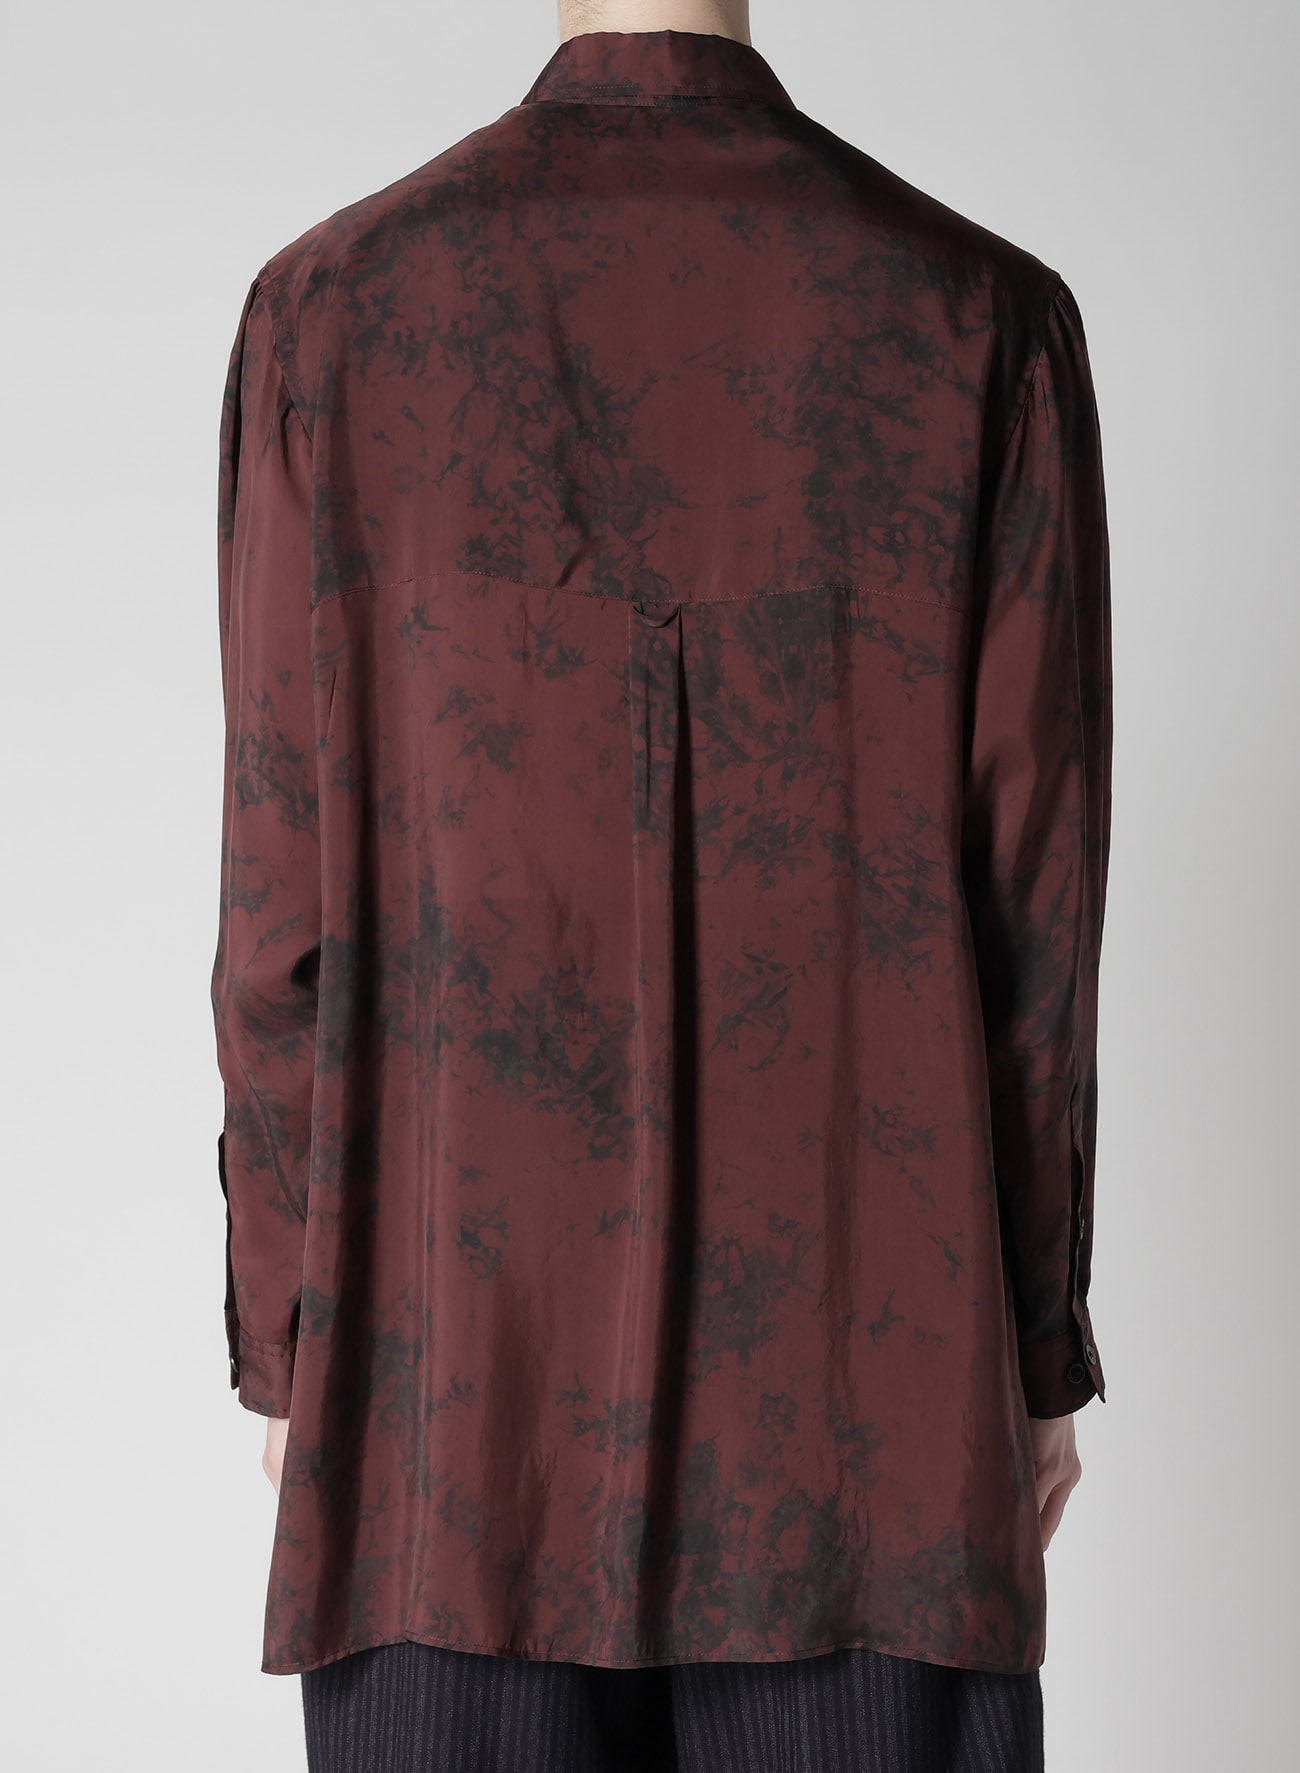 CUPRO TAFFETA BIG SHIRT WITH UNEVEN DYED